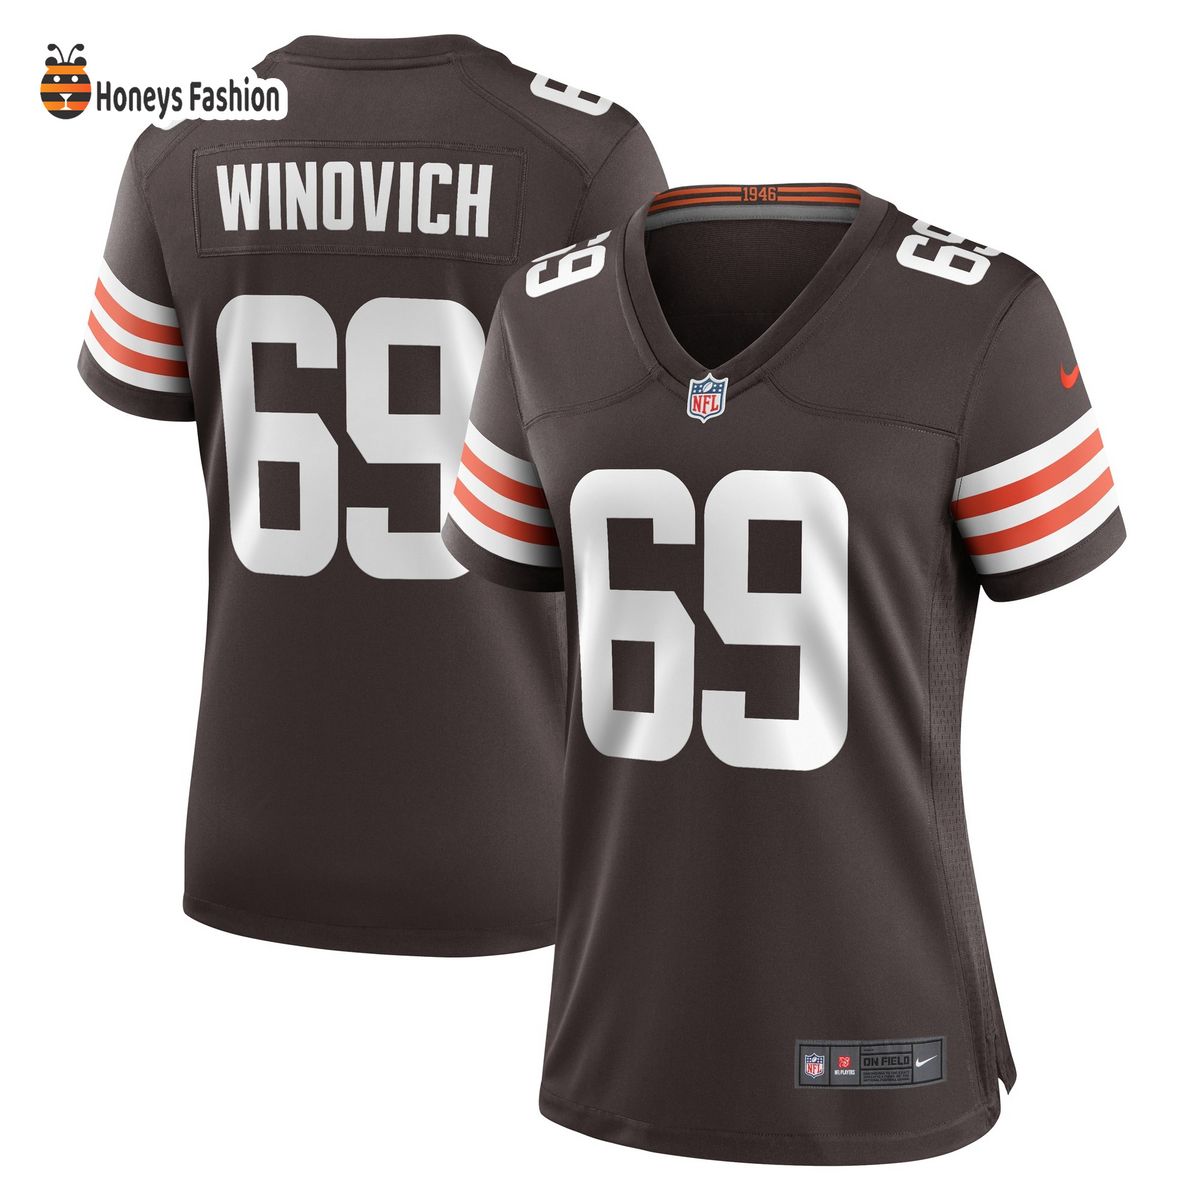 Chase Winovich Cleveland Browns Nike Women’s Game Jersey